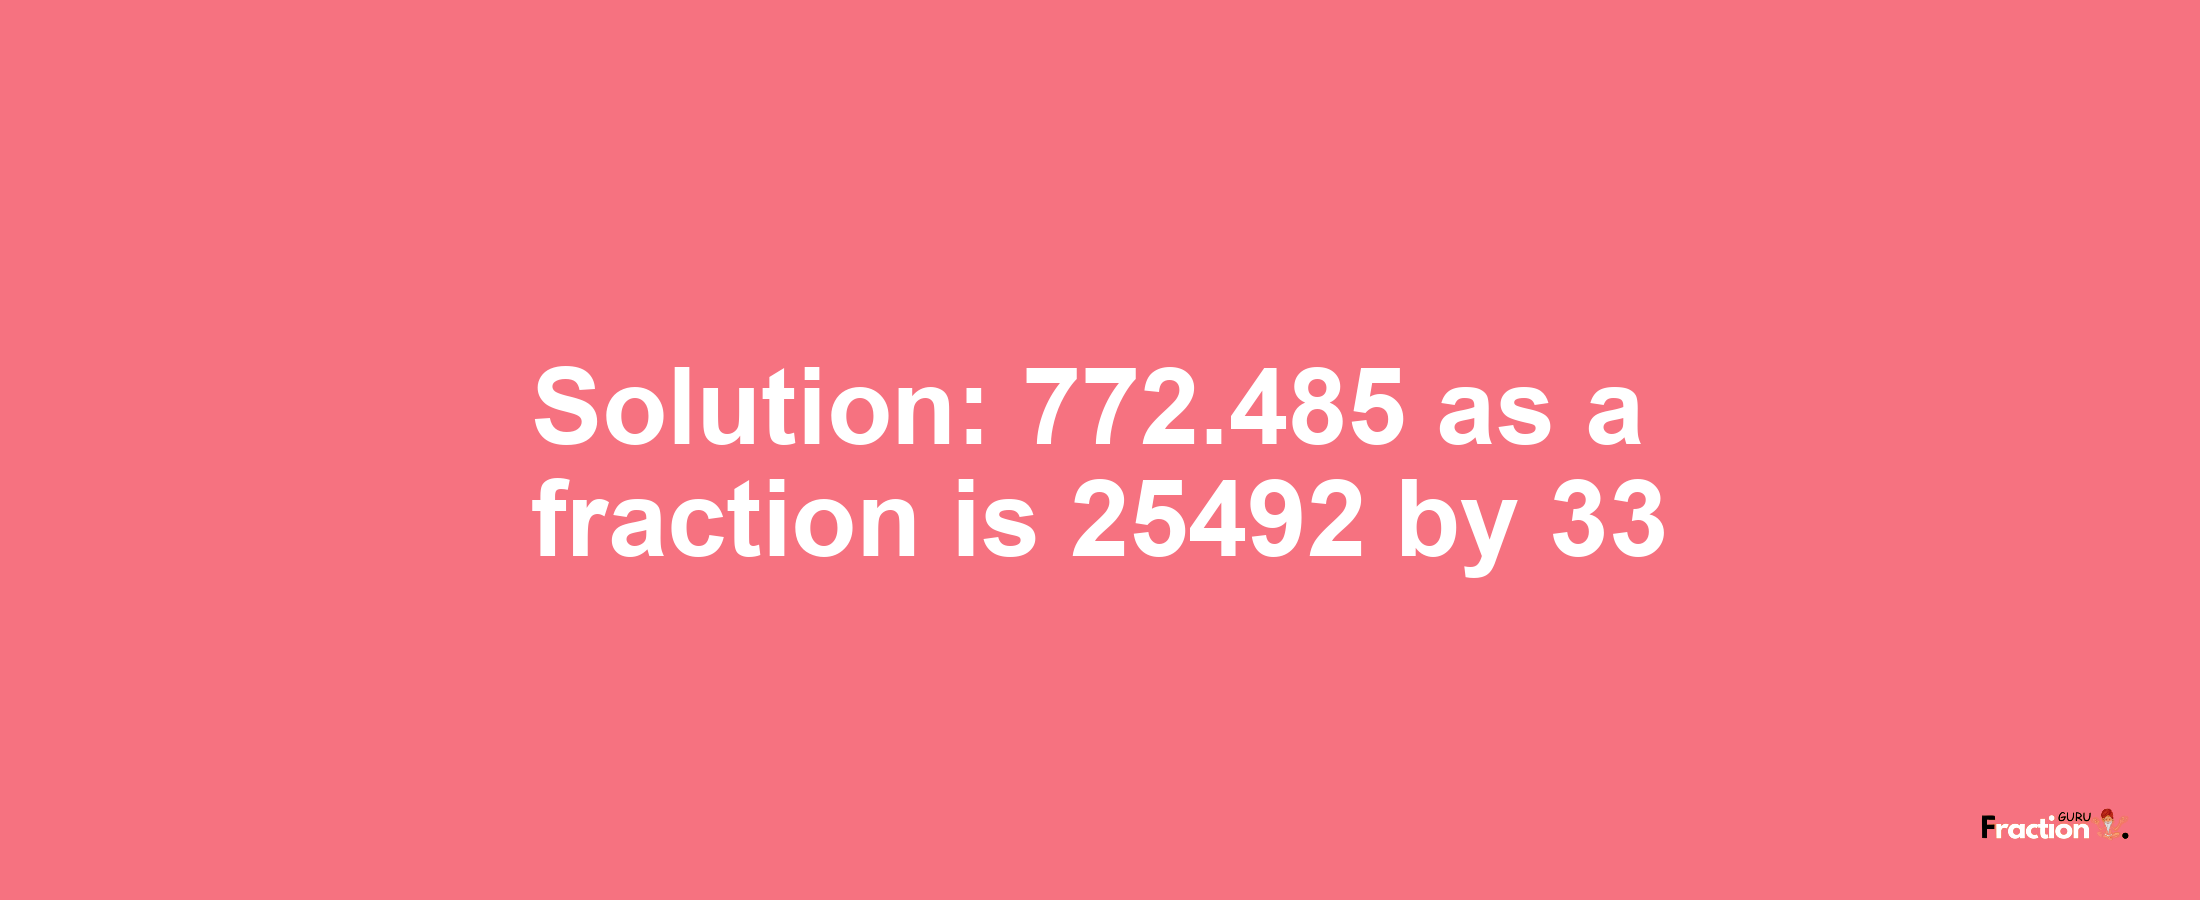 Solution:772.485 as a fraction is 25492/33